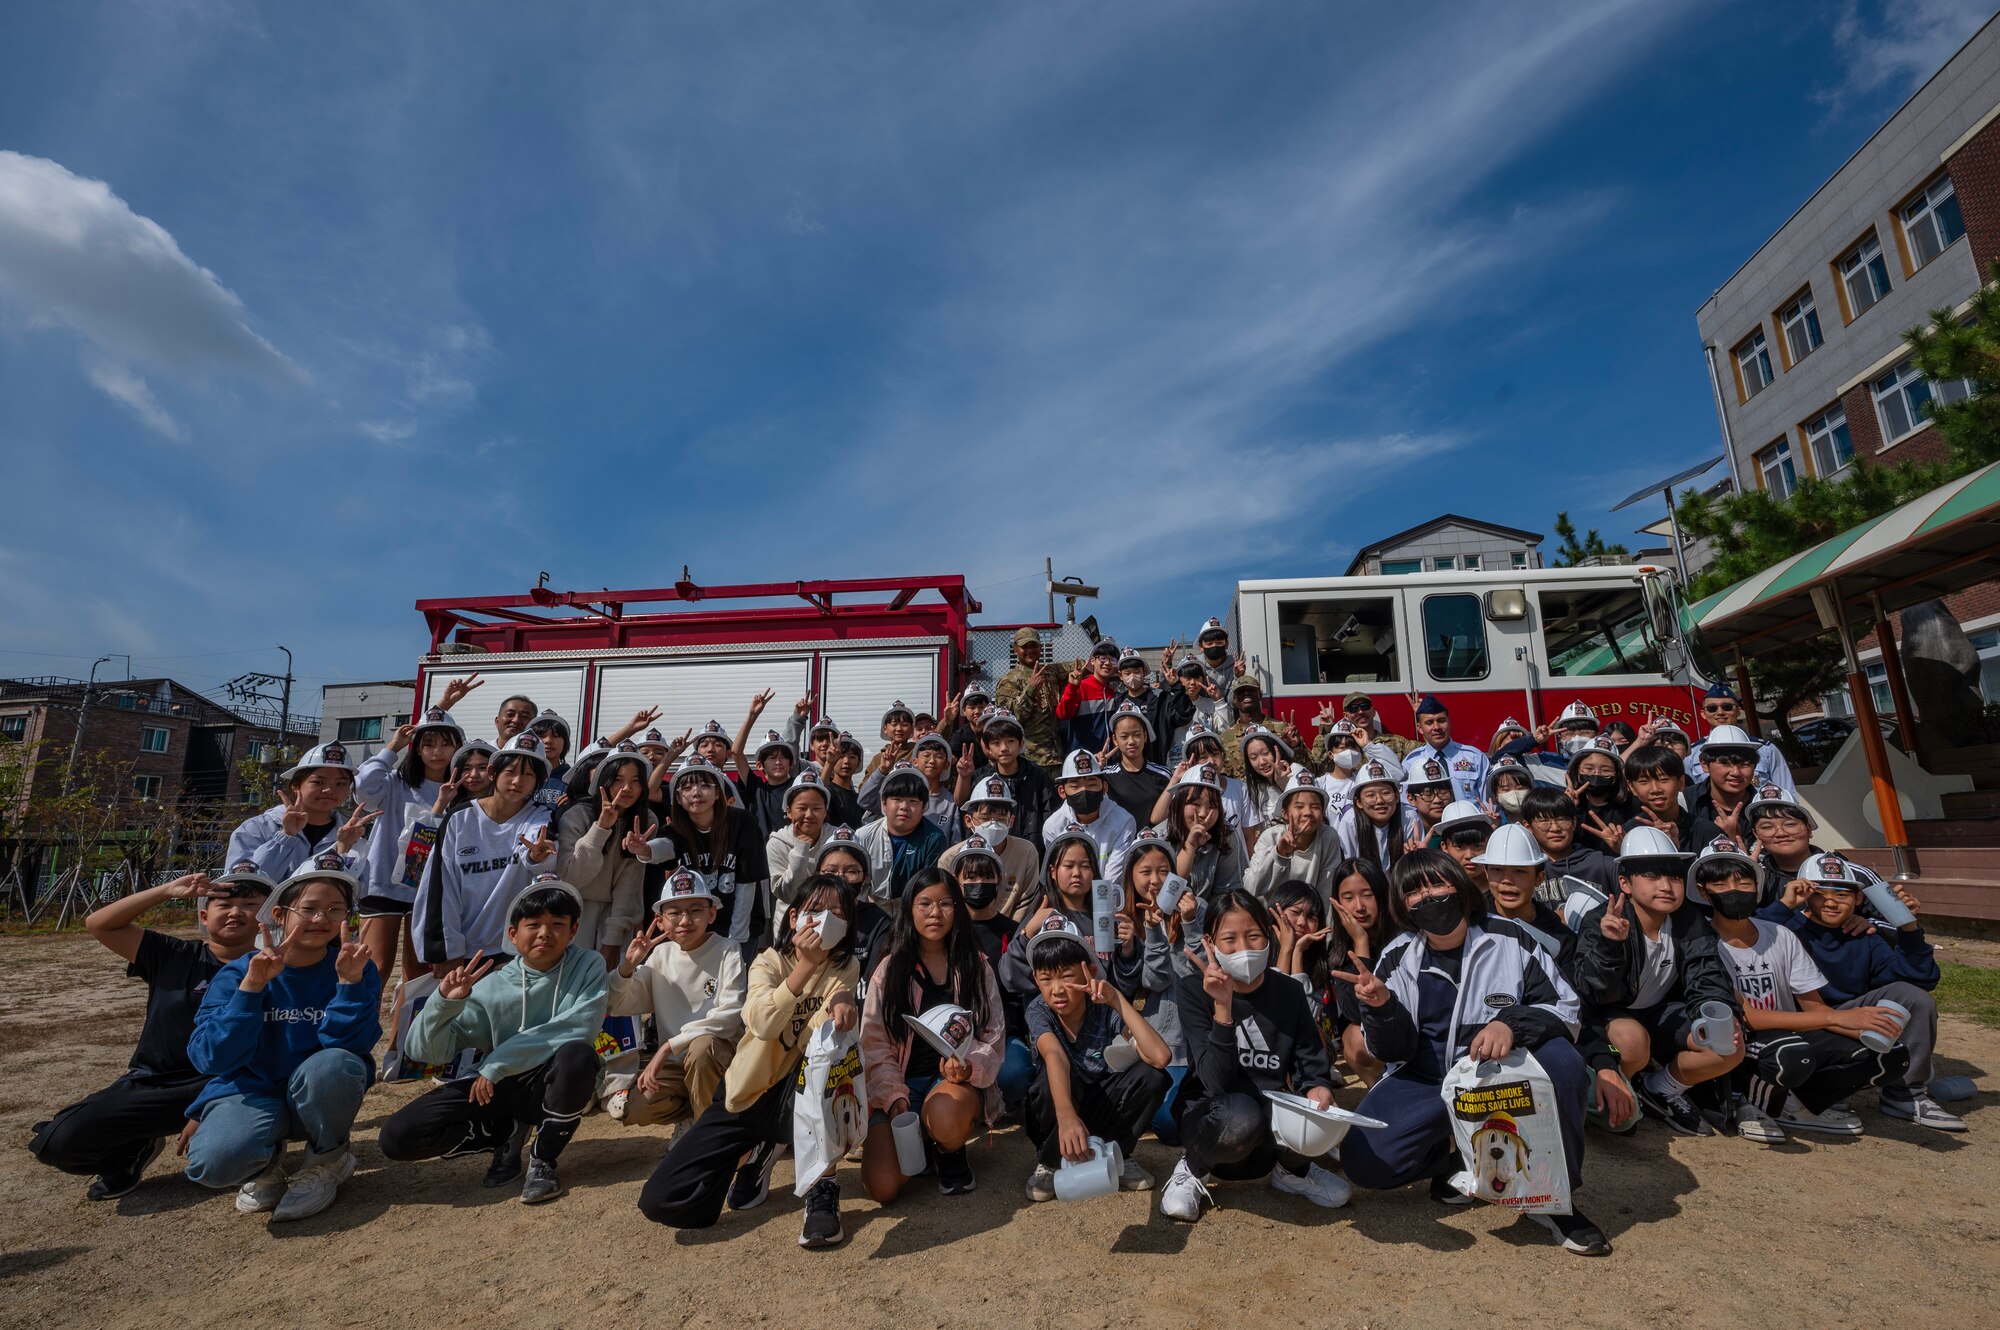 Members from the 8th Civil Engineer Squadron fire department gather for a photo with students from Gunsan Jigok Elementary School.